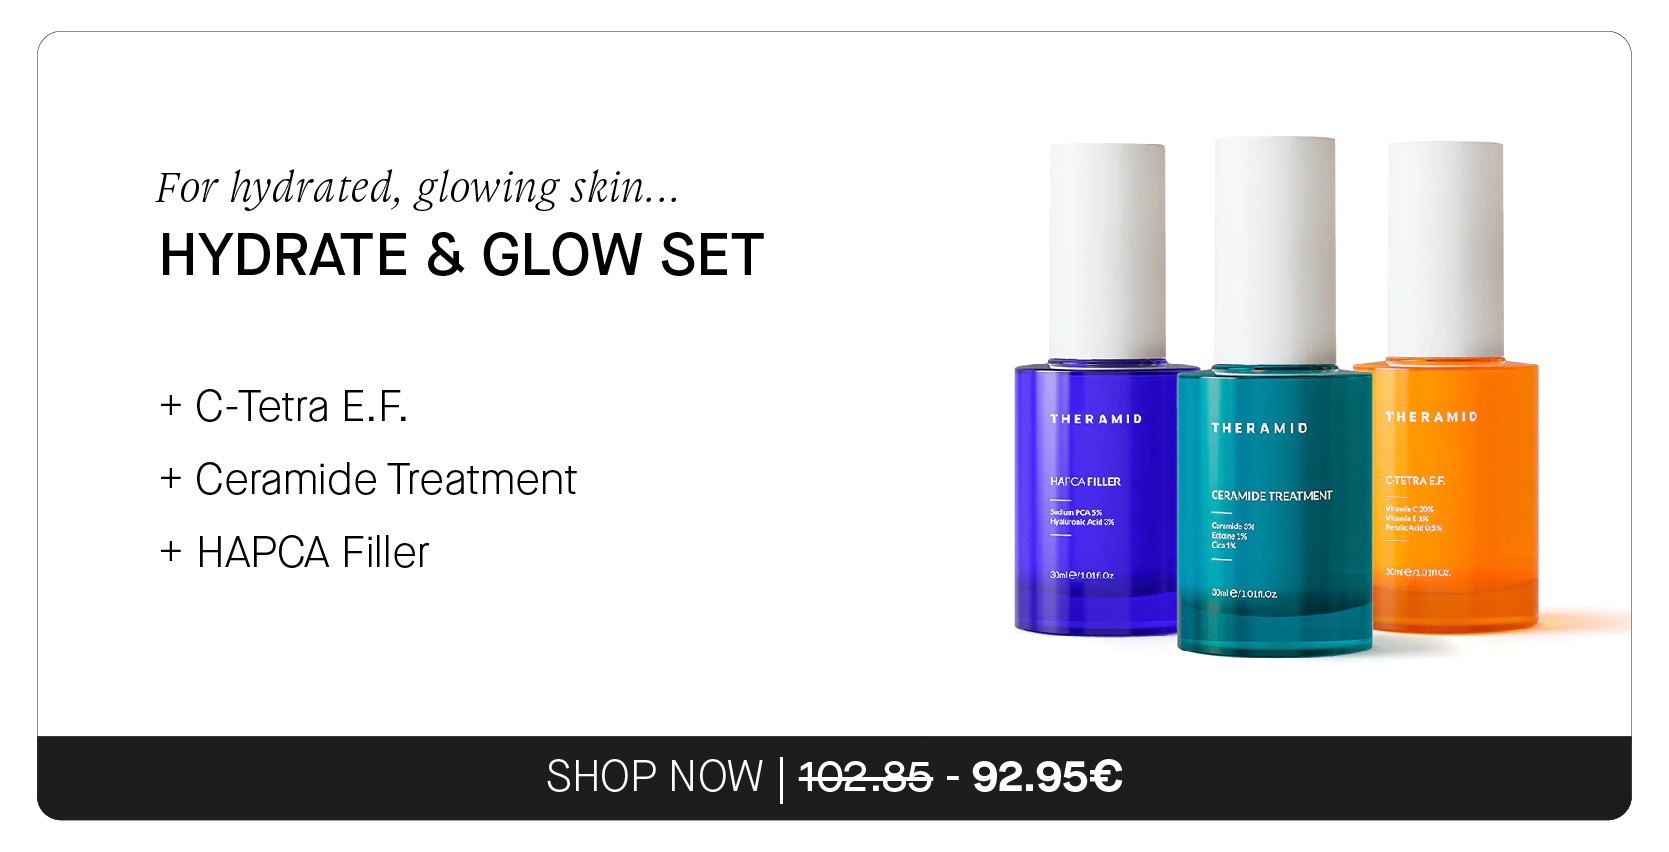  For hydrated, glowing skin... HYDRATE GLOW SET C-Tetra E.F. Ceramide Treatment HAPCA Filler SHOP NOW 462-85 - 92.95 